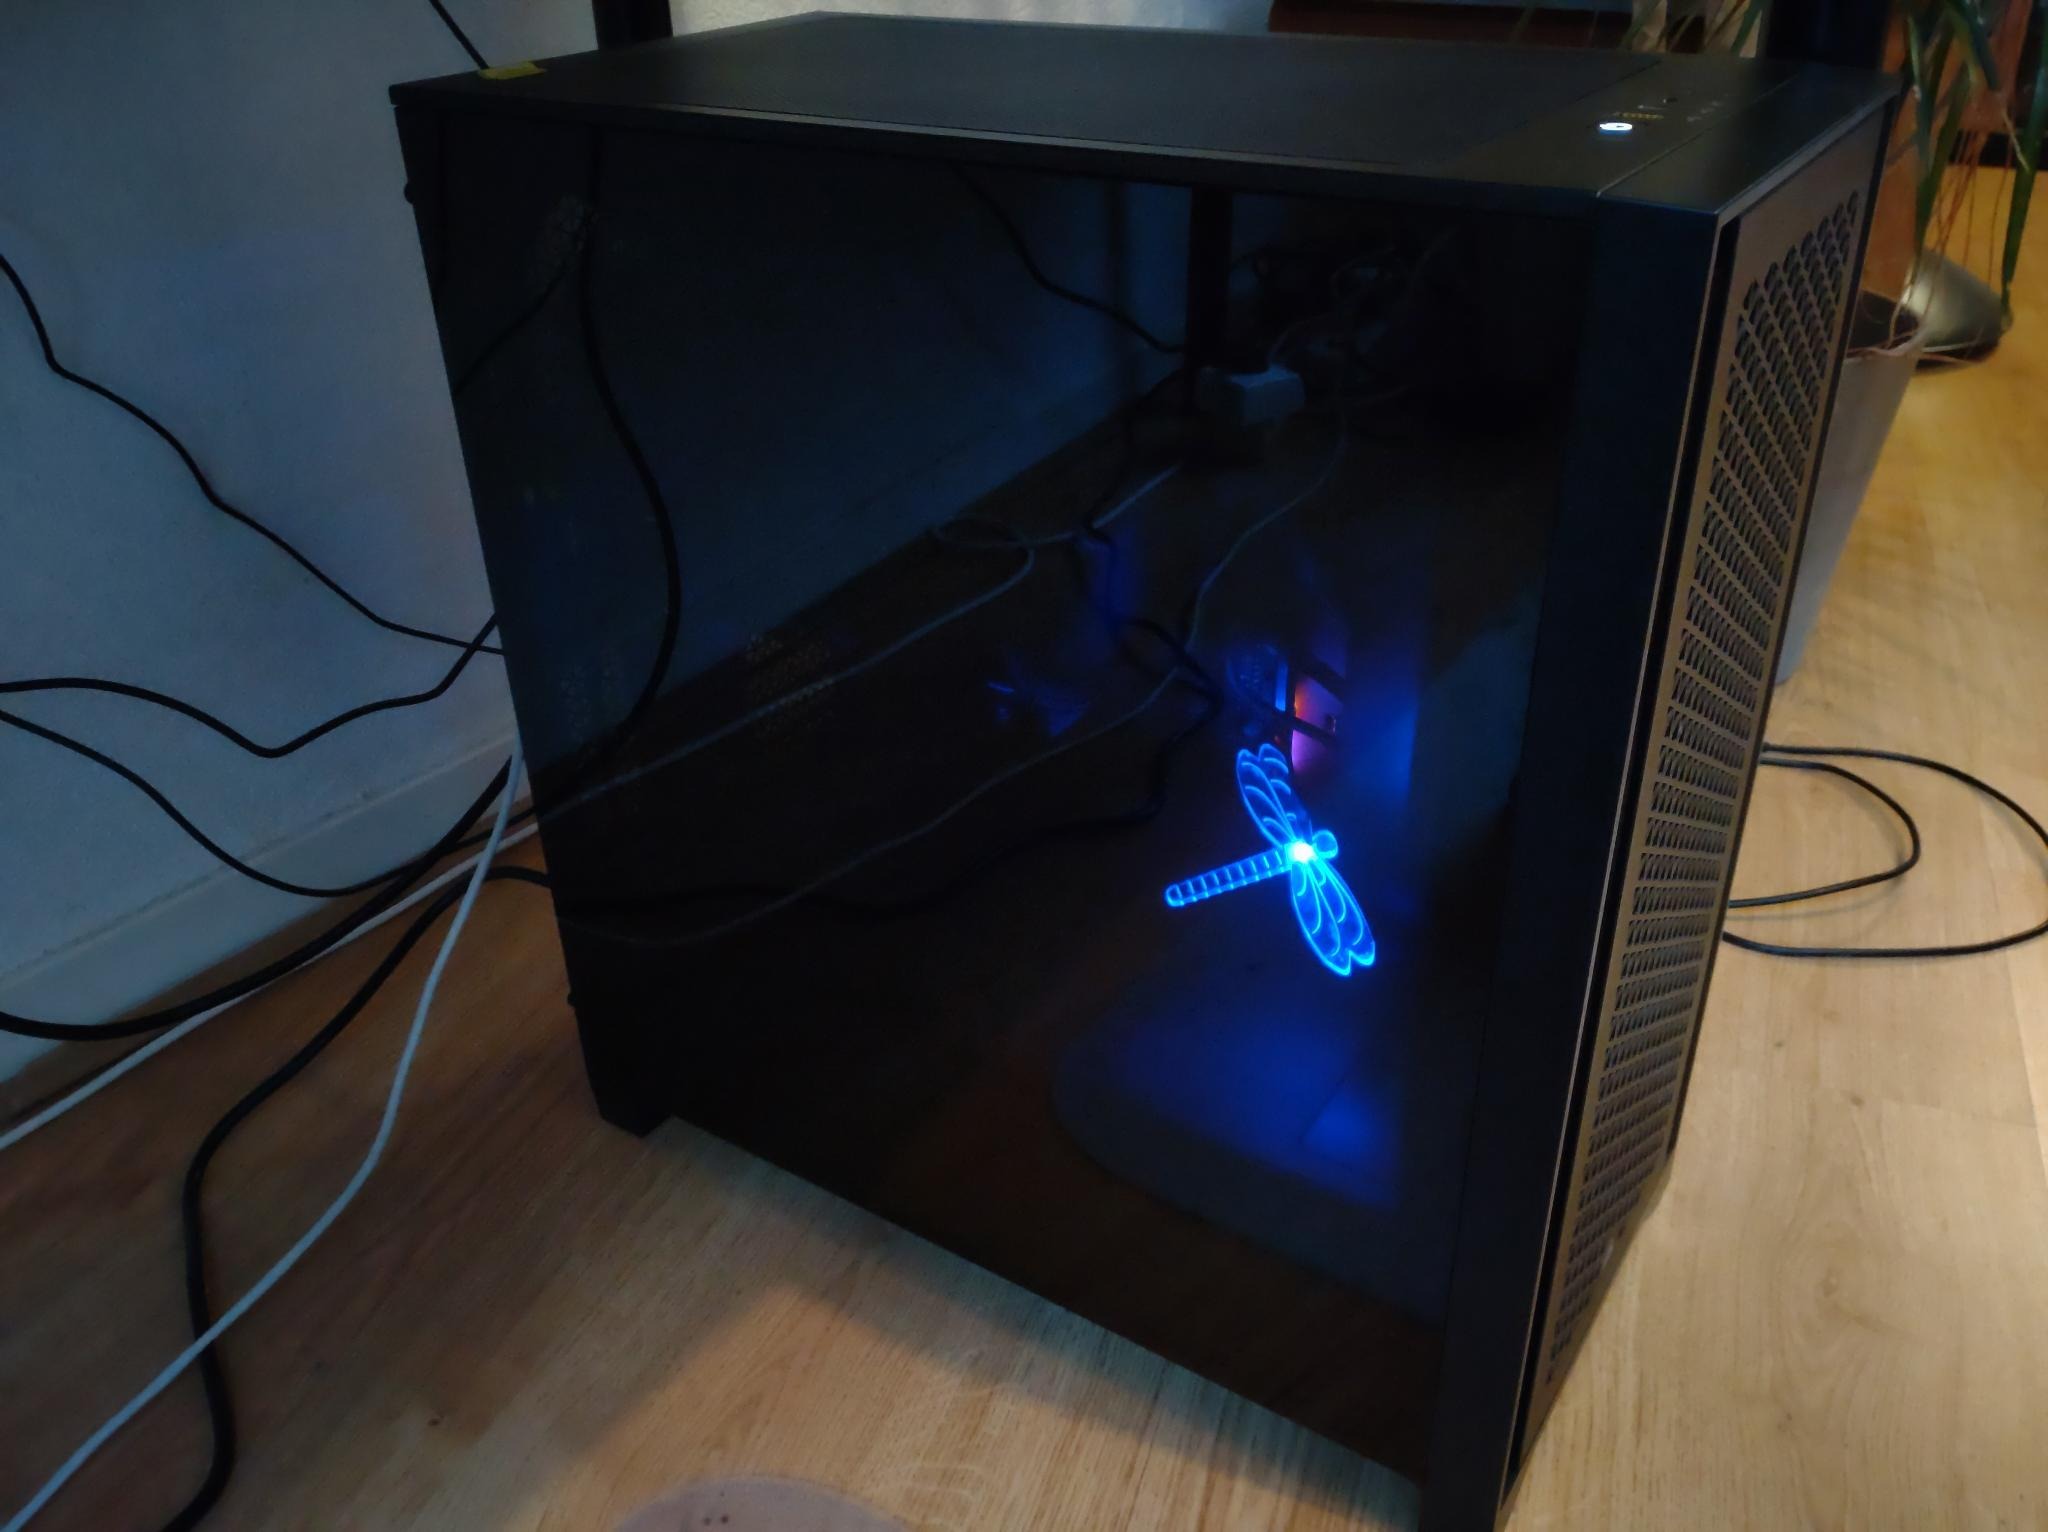 A PC case with a blue glowing dragonfly inside